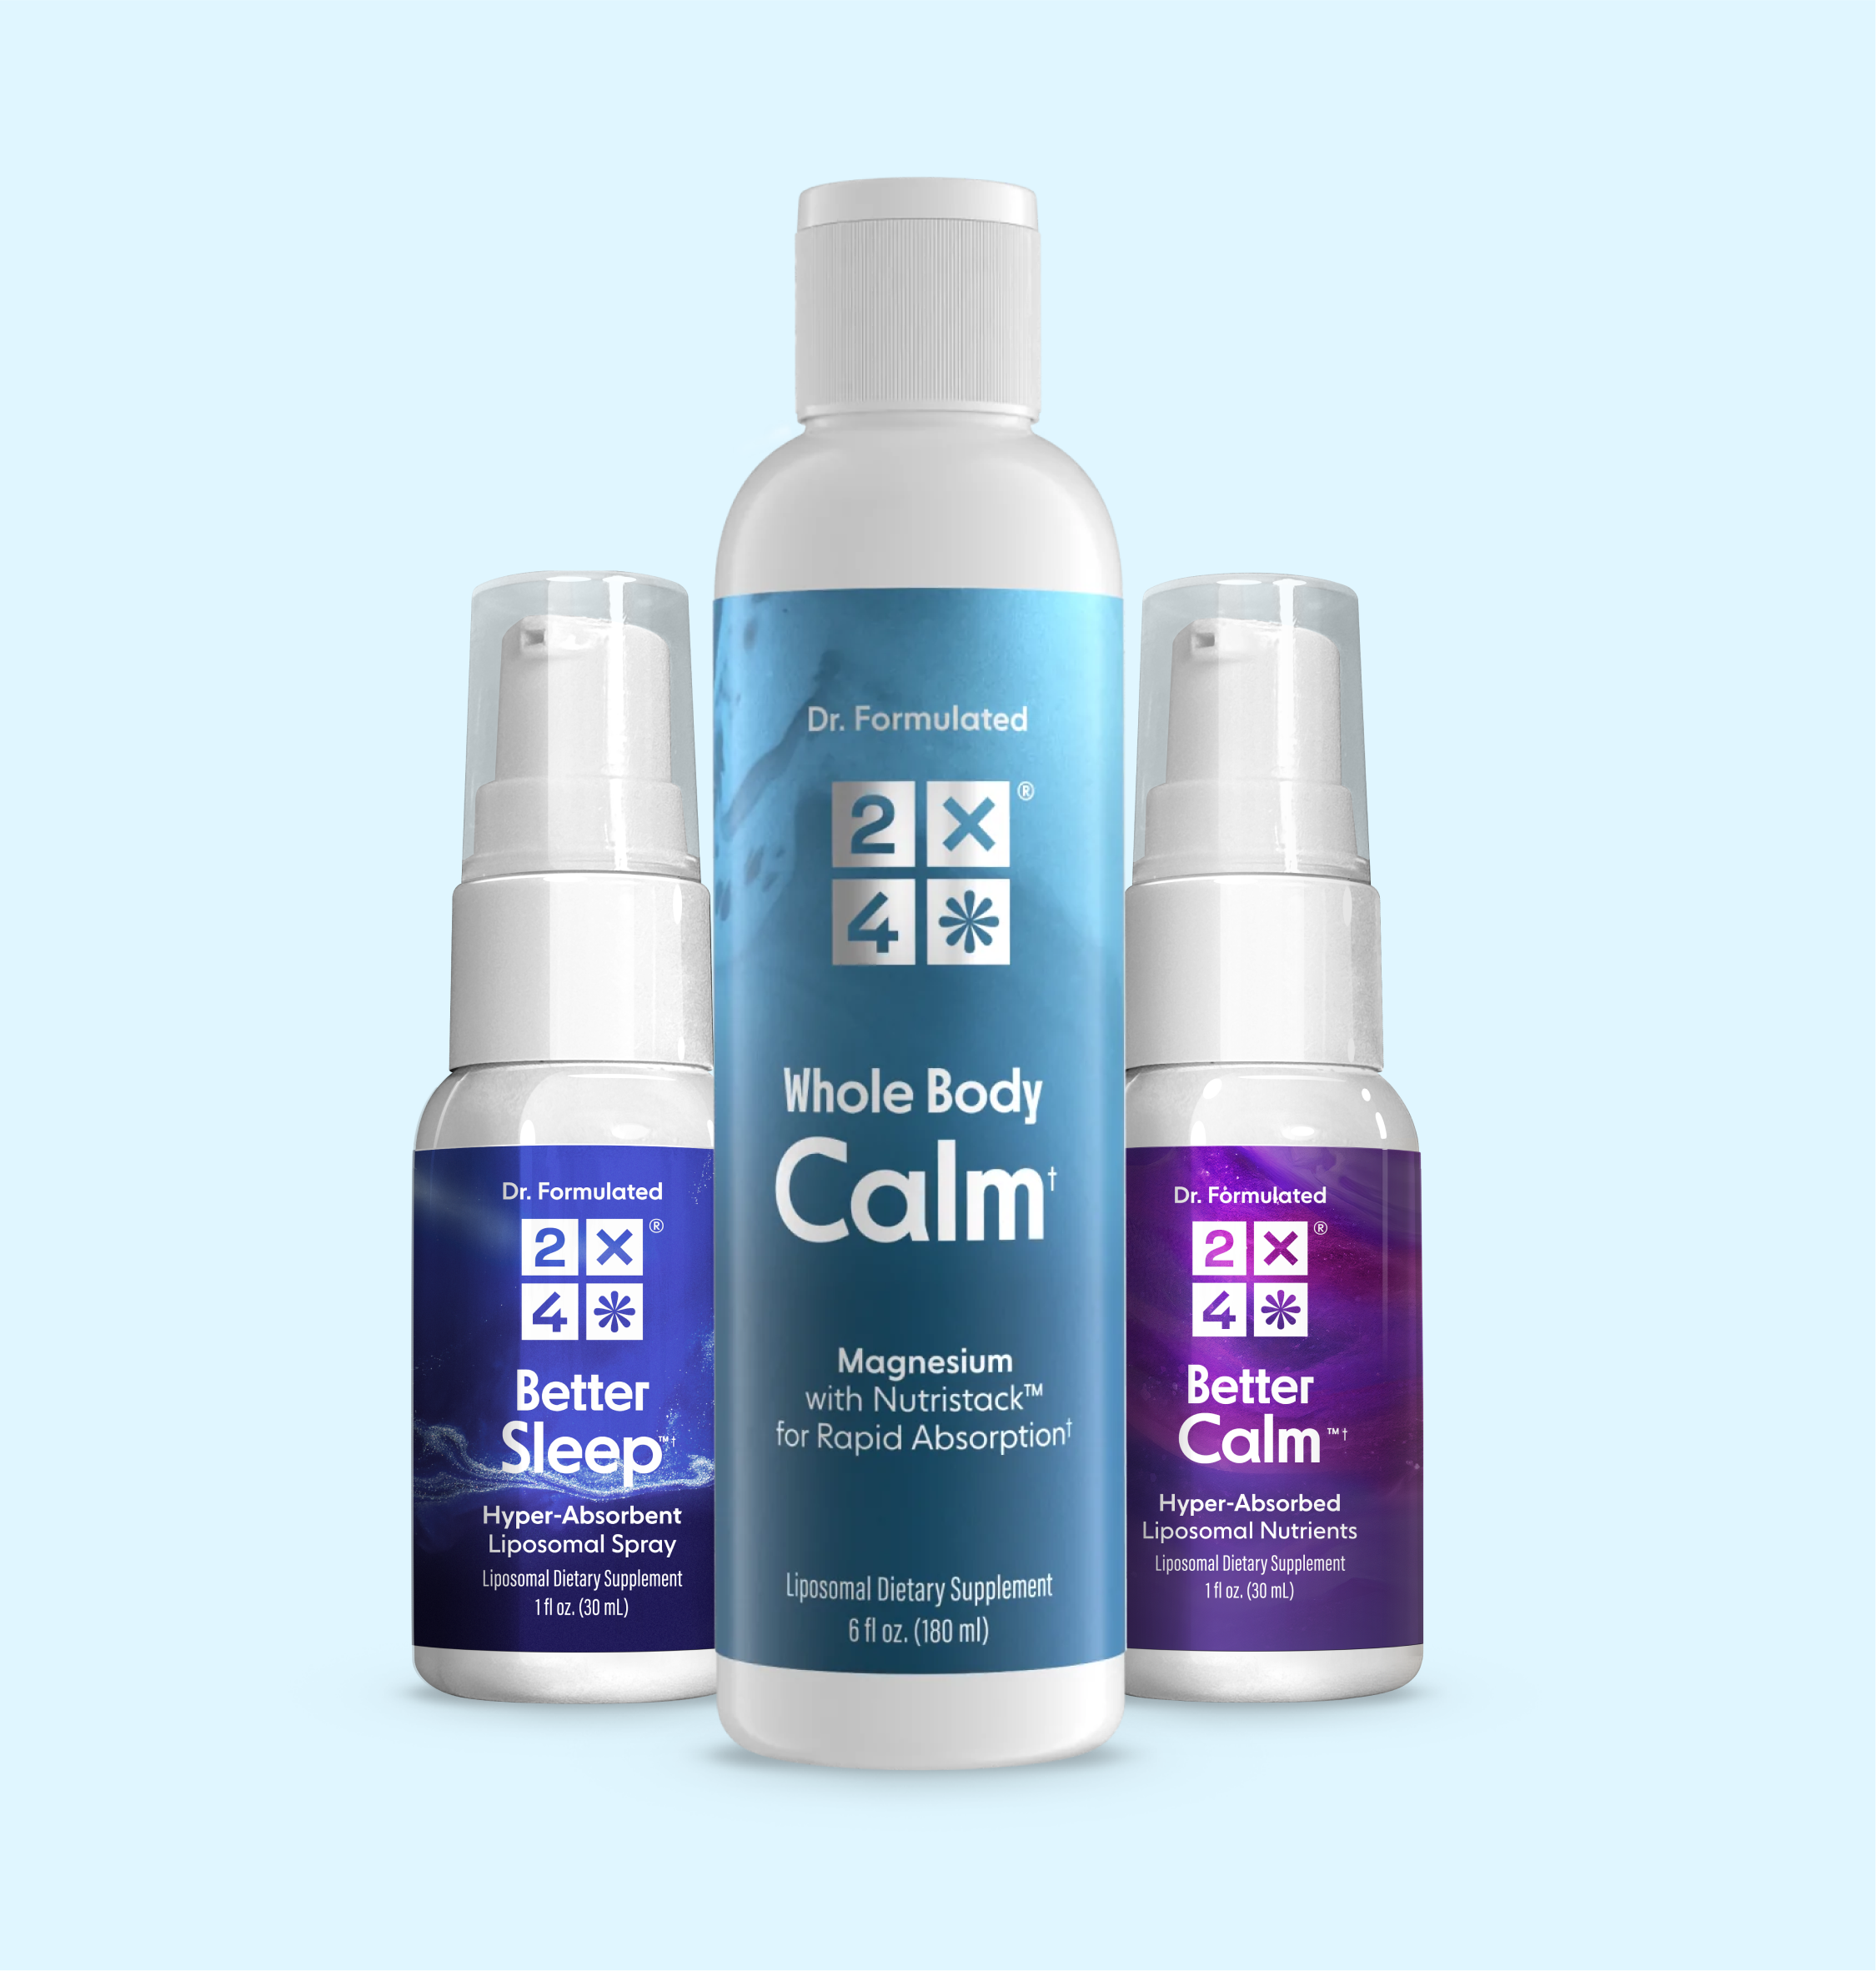 2x4 Stay Cool and Calm Bundle